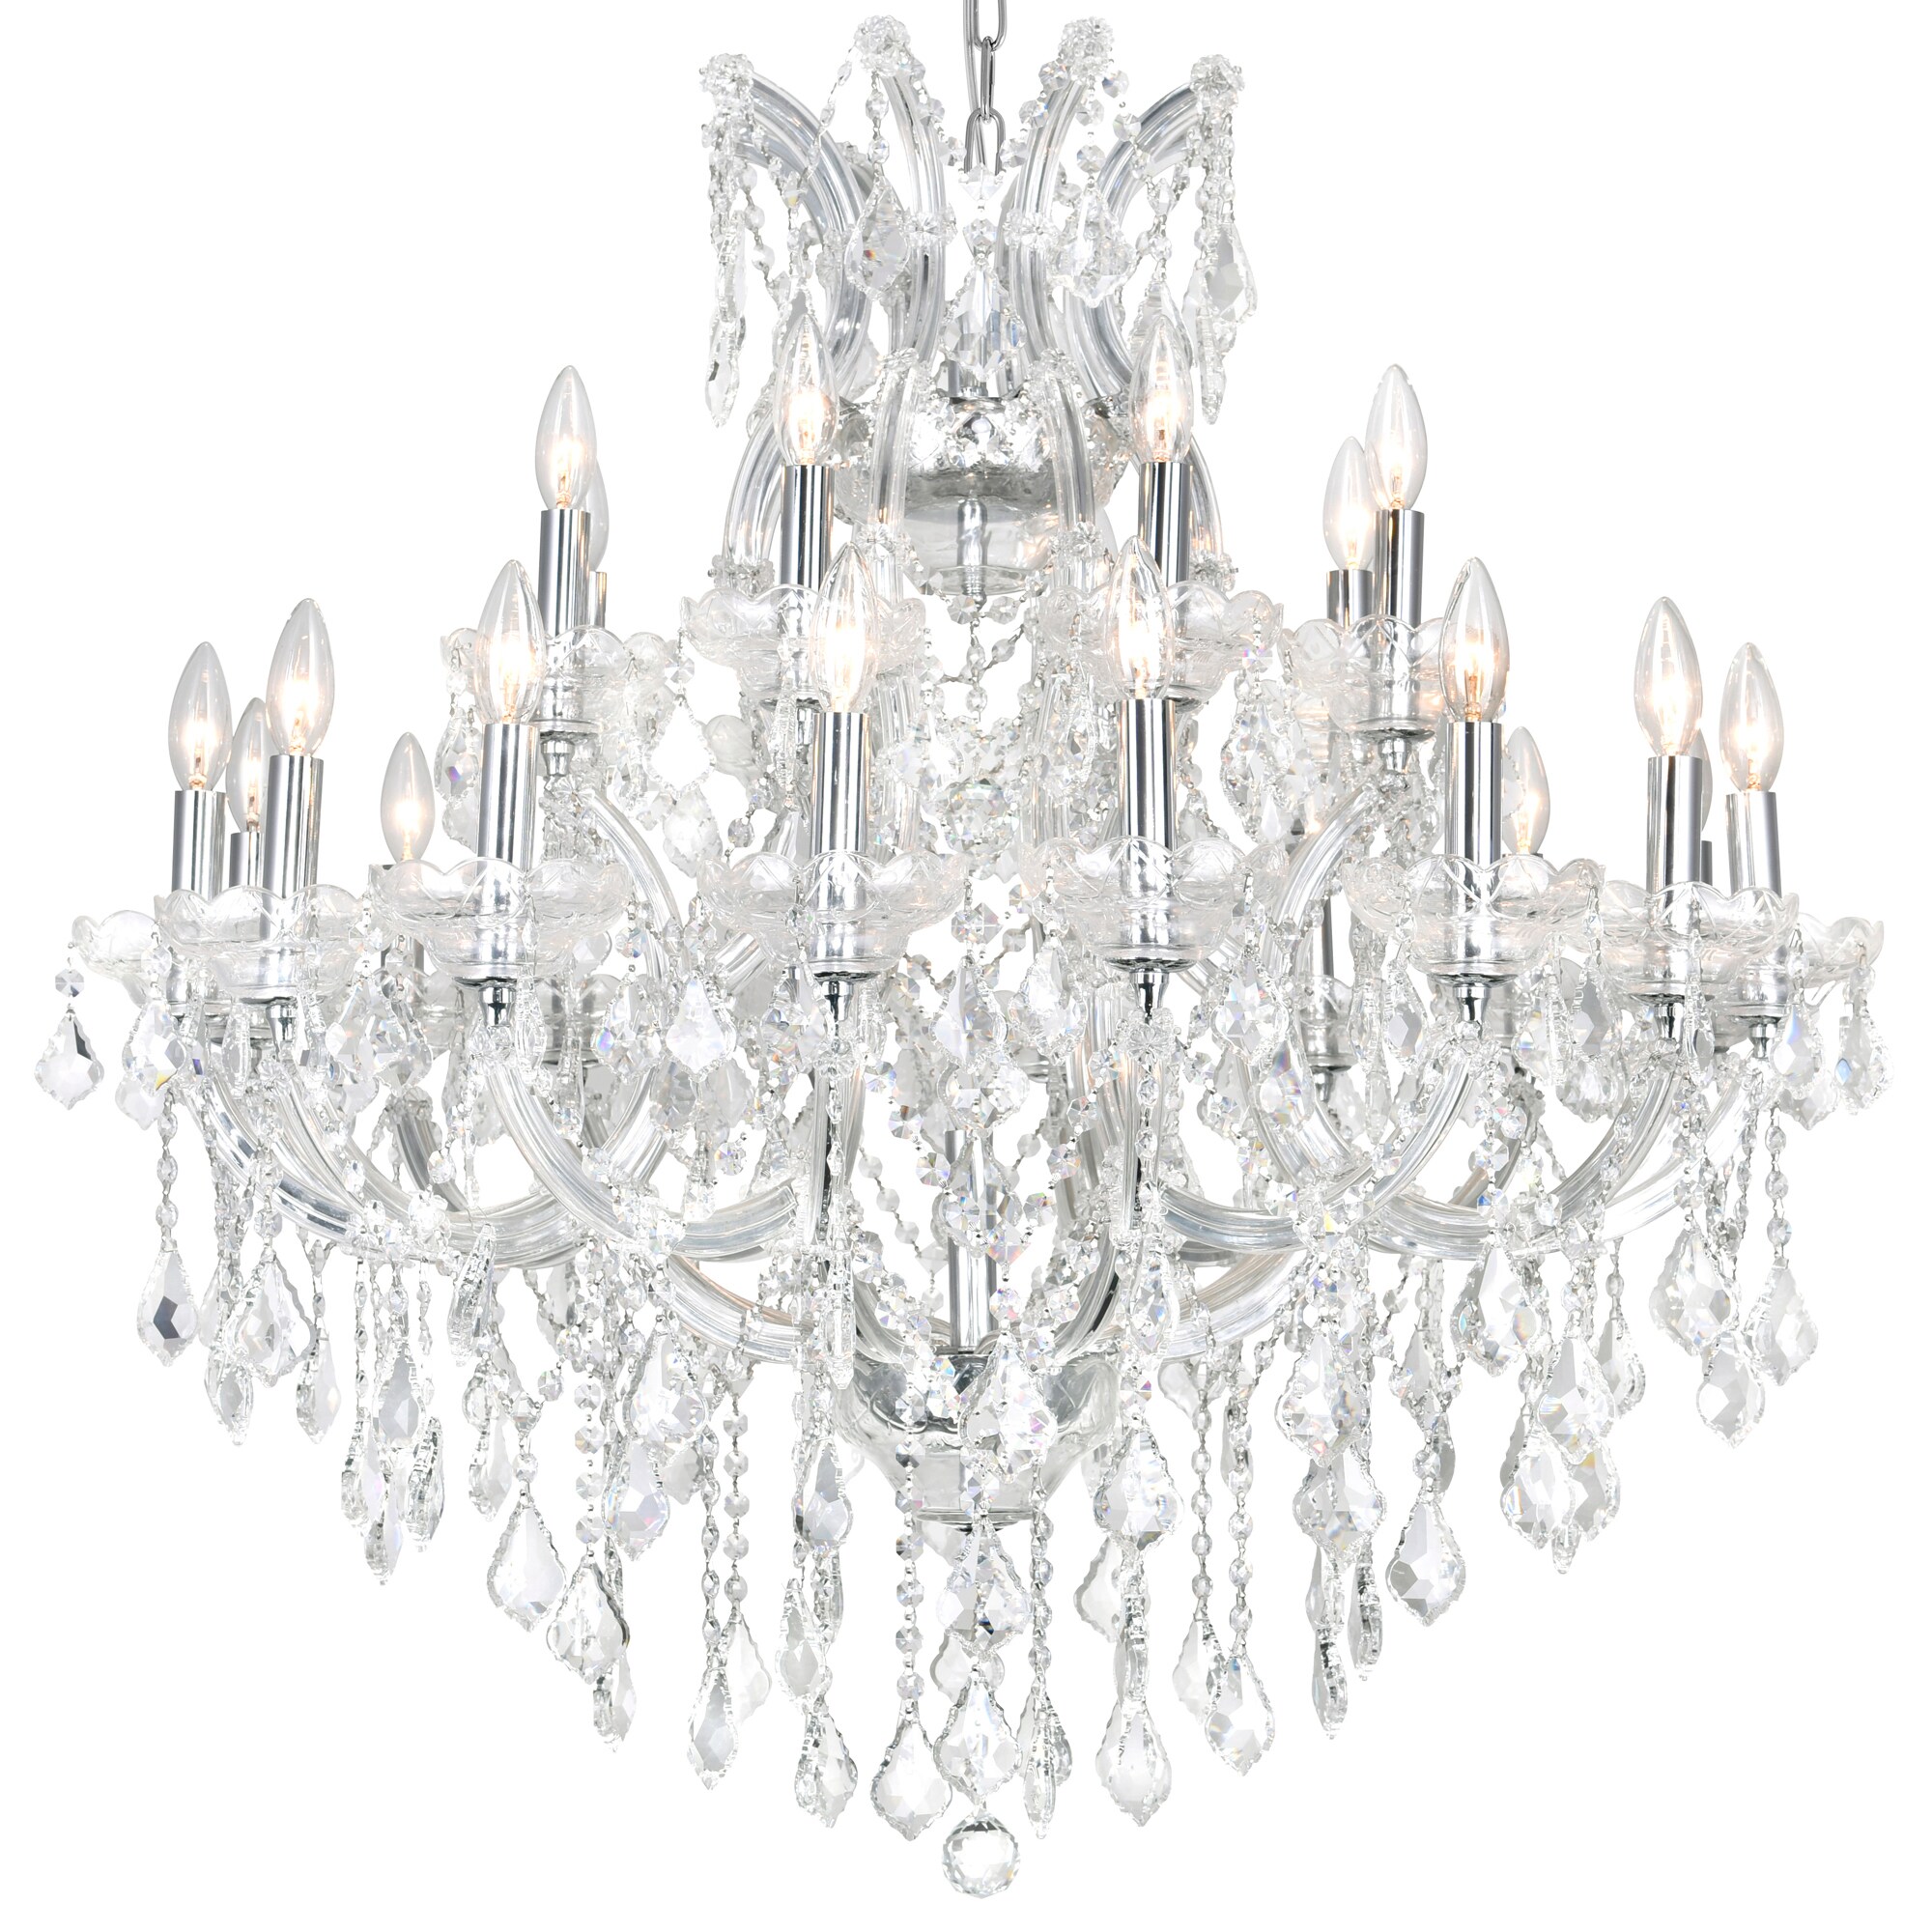 CWI Lighting Maria Theresa 25-Light Black Glam LED Dry rated Chandelier ...